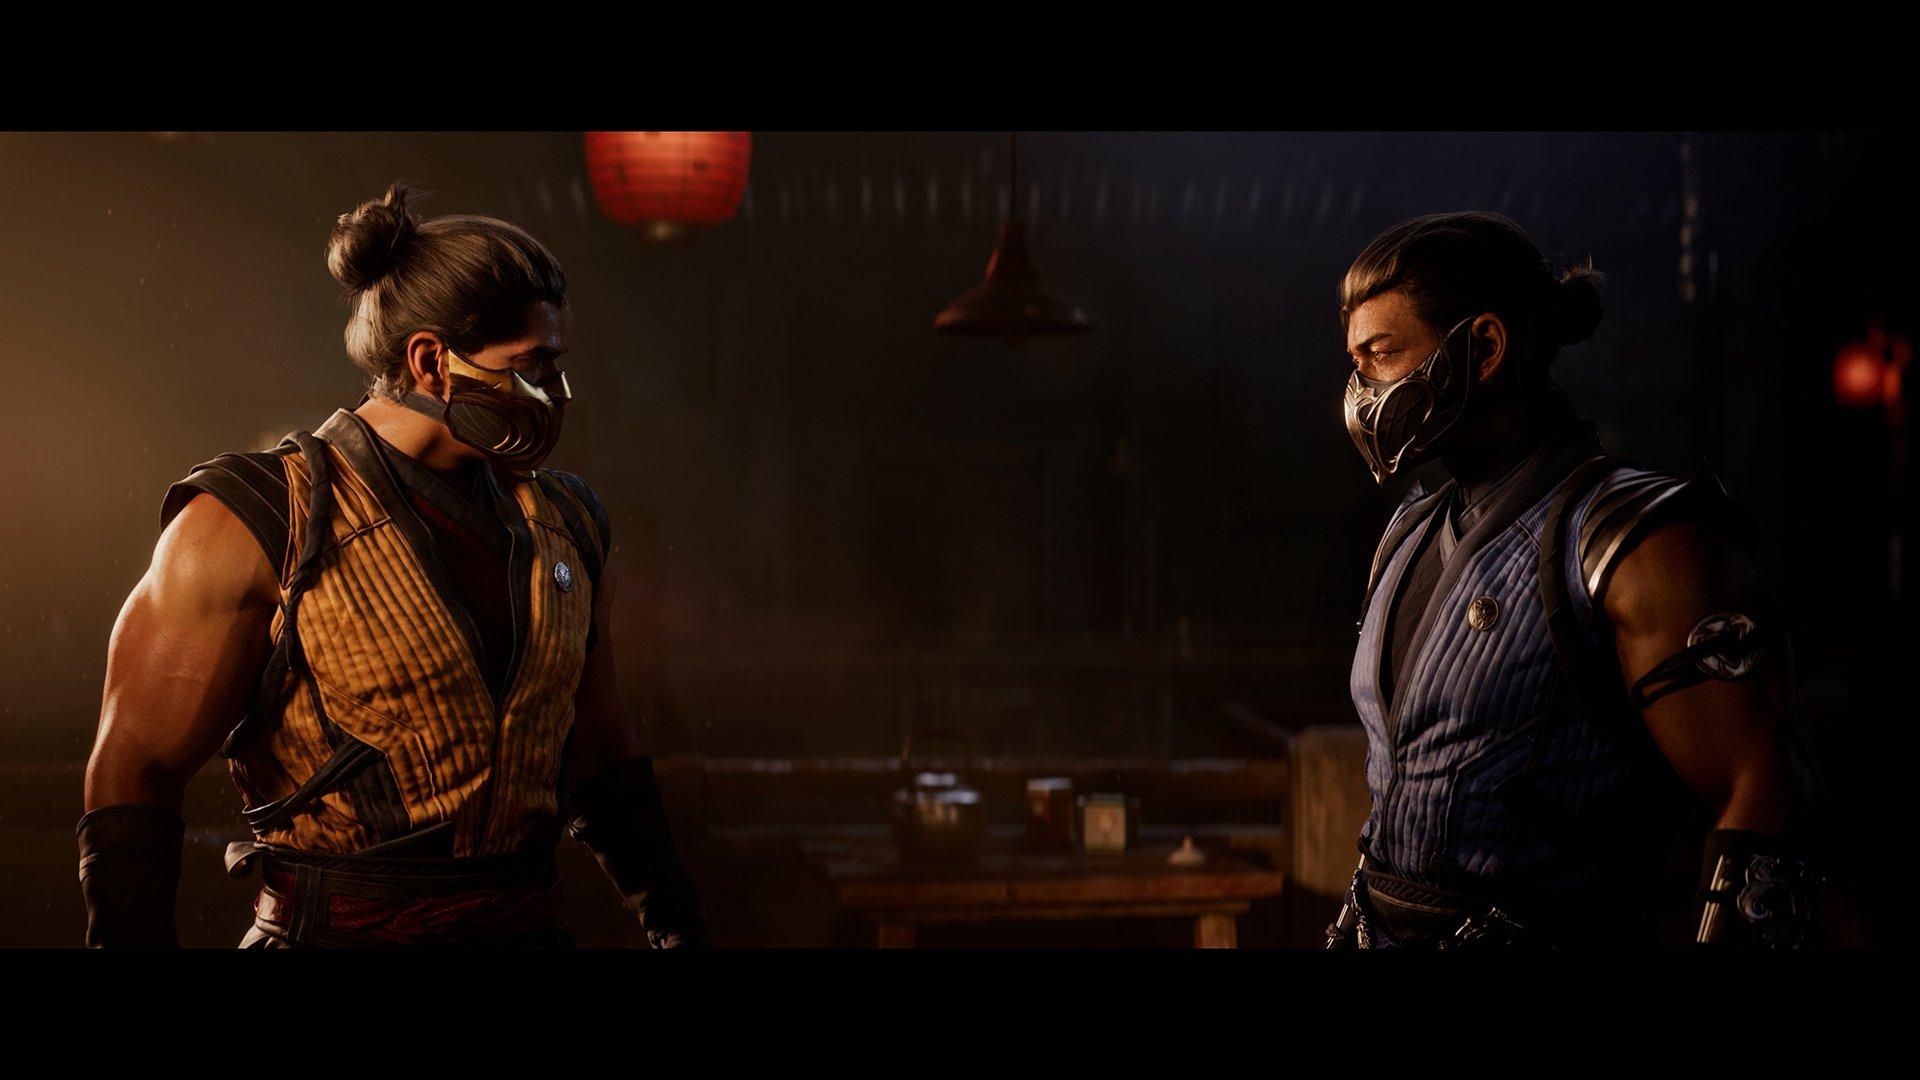 Mortal Kombat 1' will narrate iconic fatalities to visually impaired players